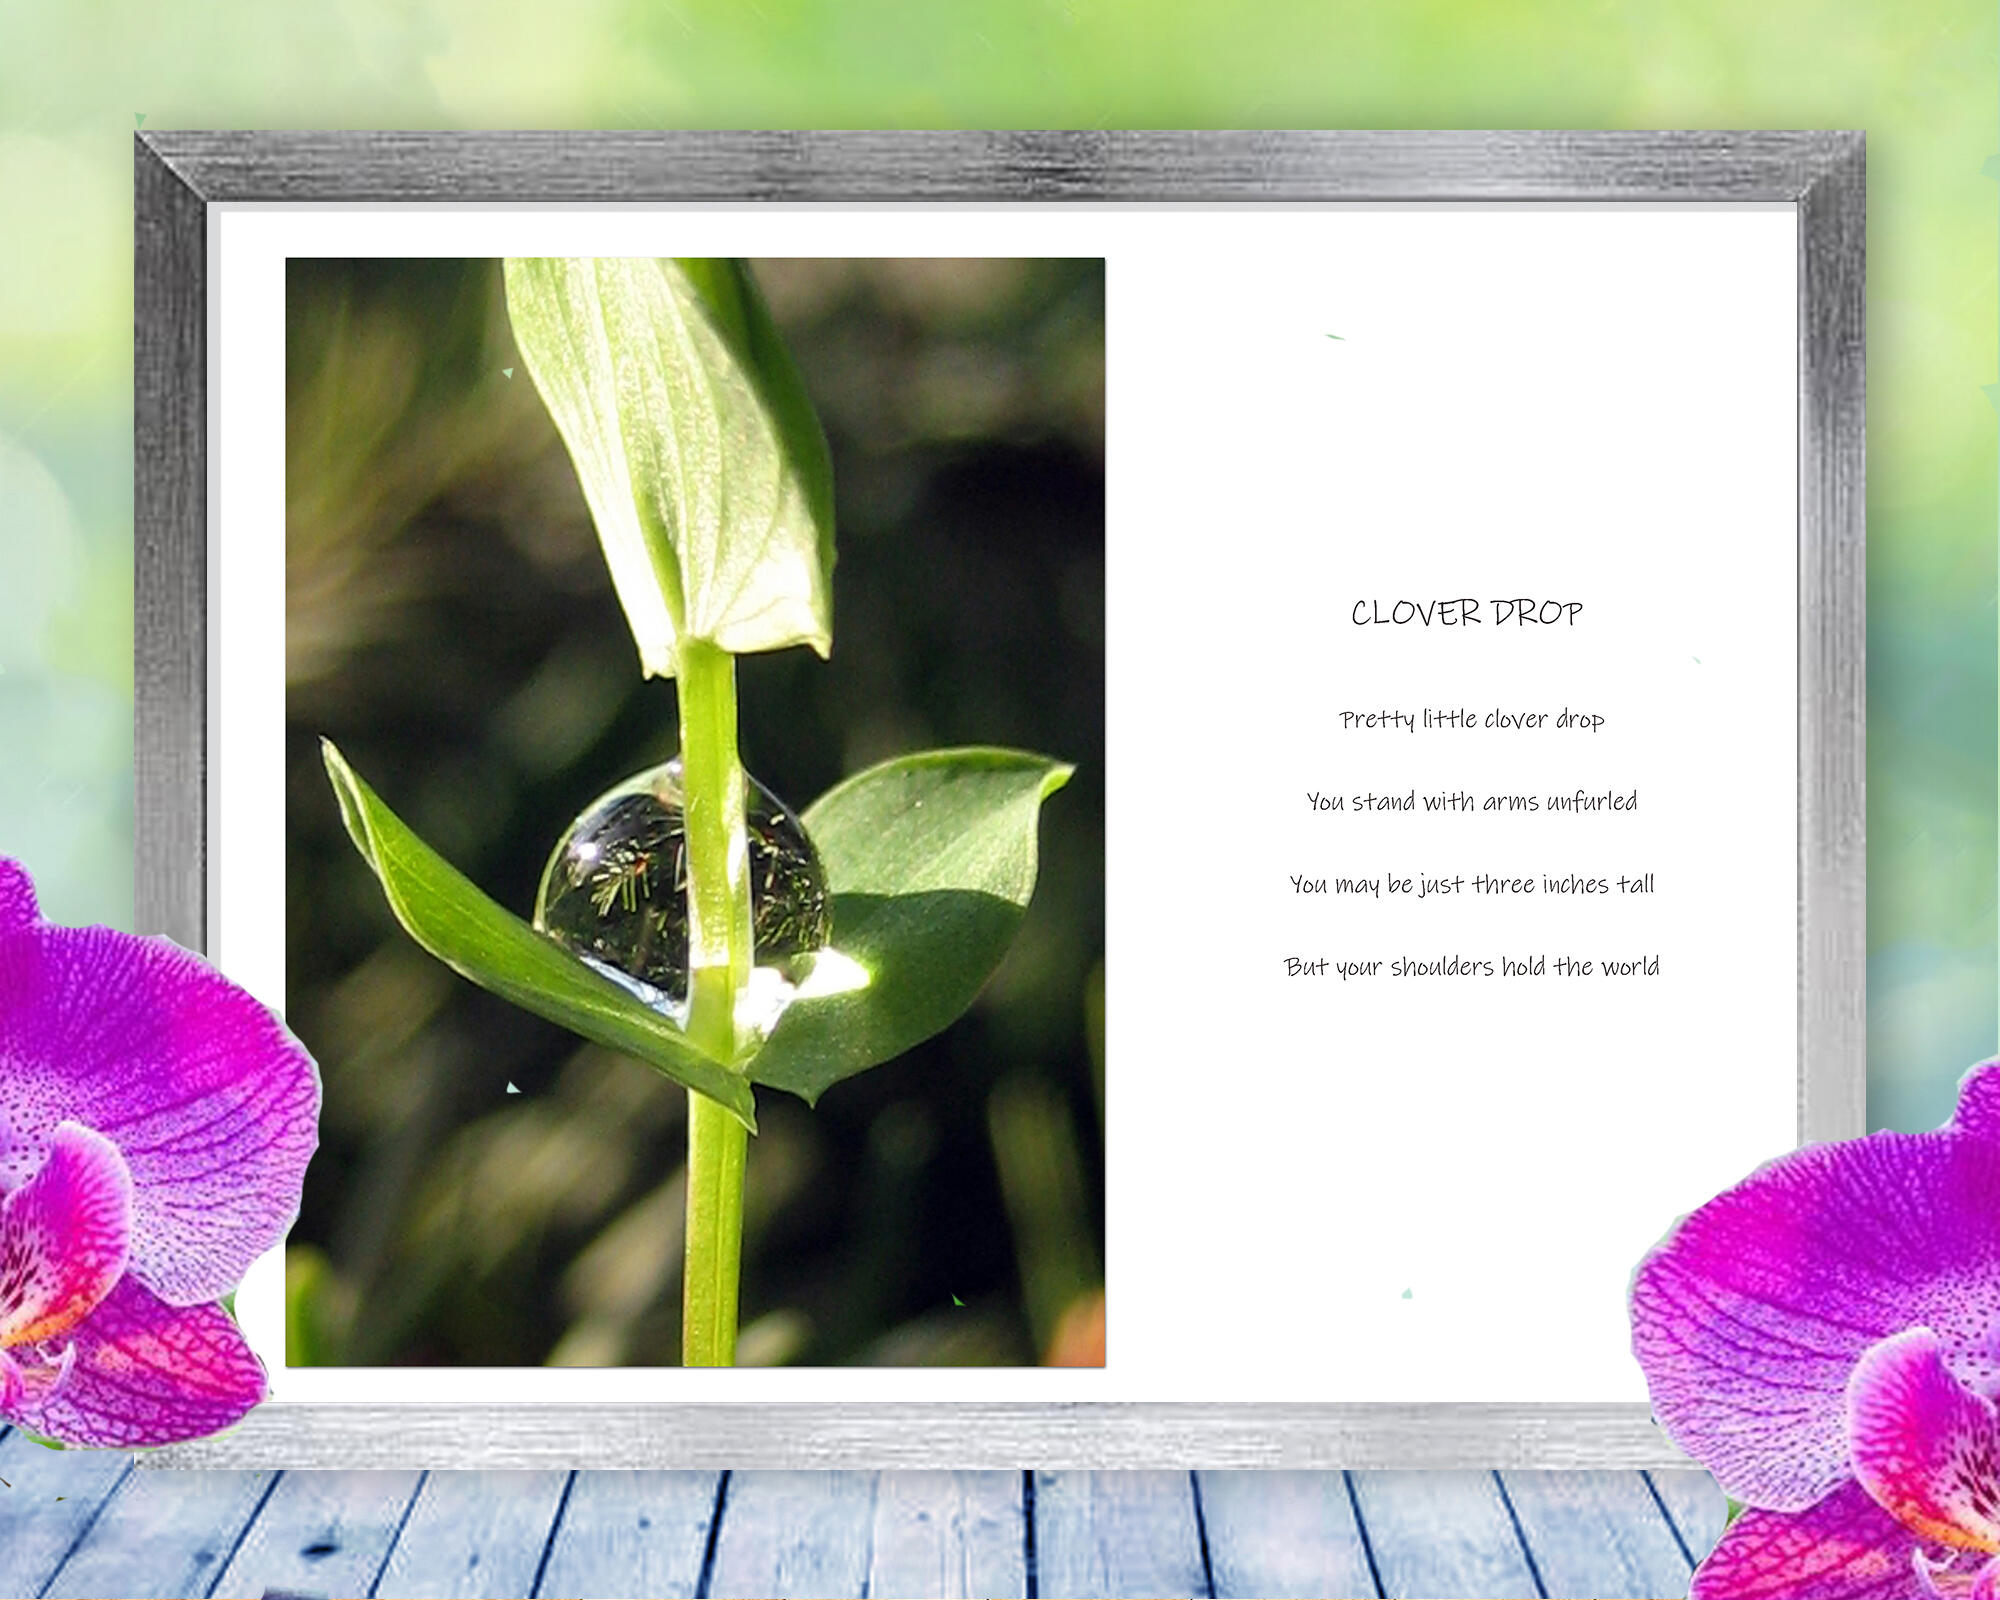 A tiny little clover holds a giant drop of dew, just like Atlas who held up the earth. Nature Photo with Poem - Clover Drop by The Poetry of Nature.